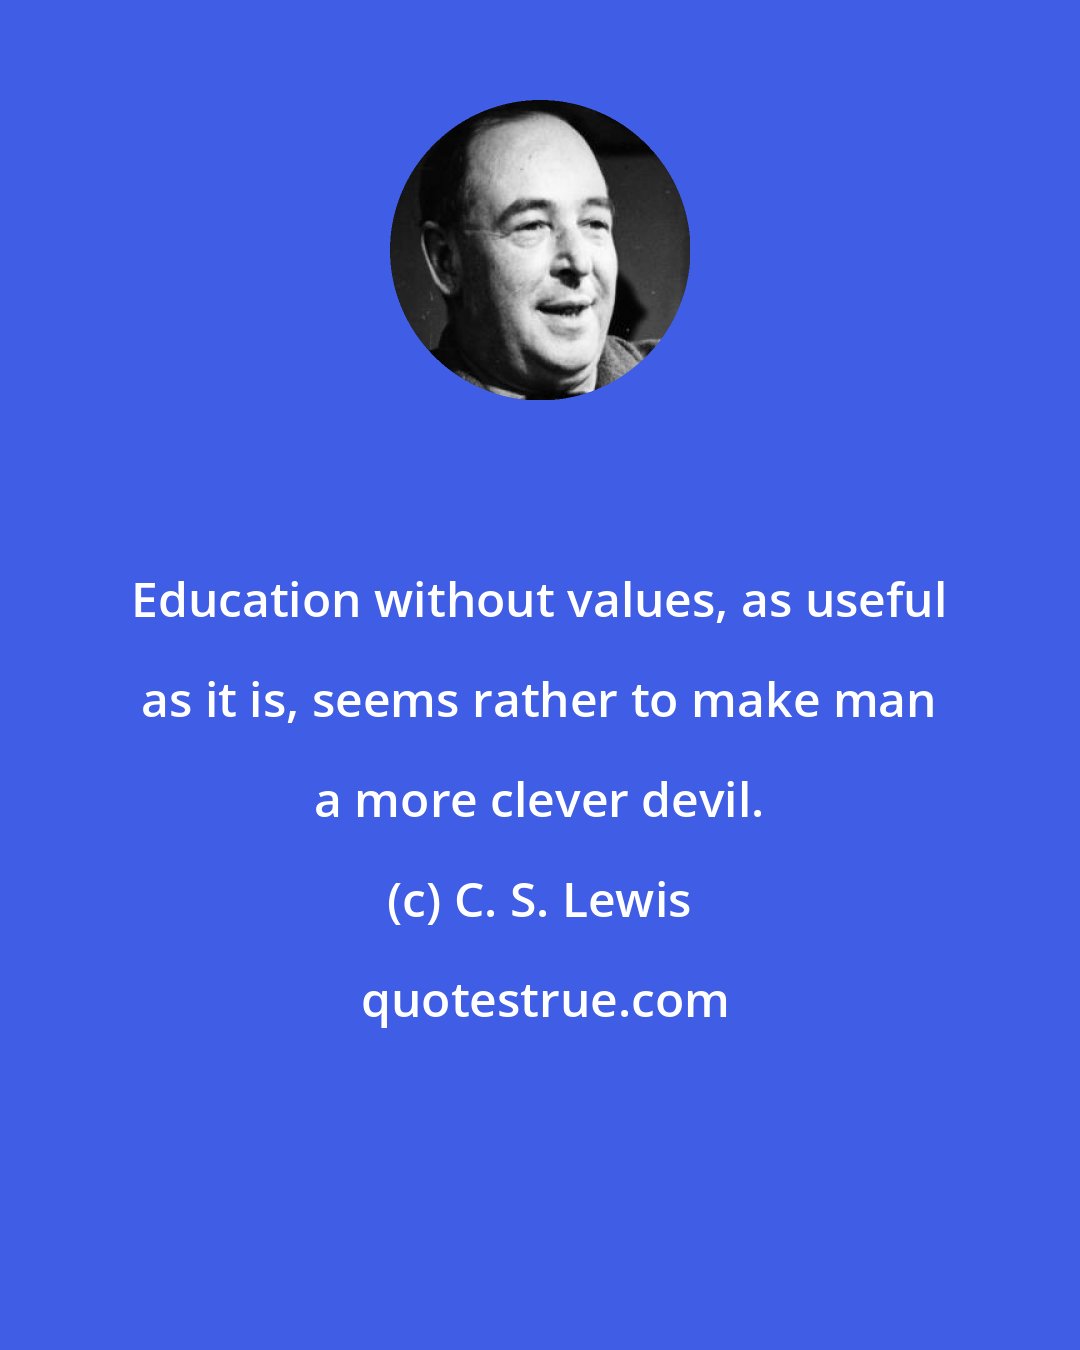 C. S. Lewis: Education without values, as useful as it is, seems rather to make man a more clever devil.